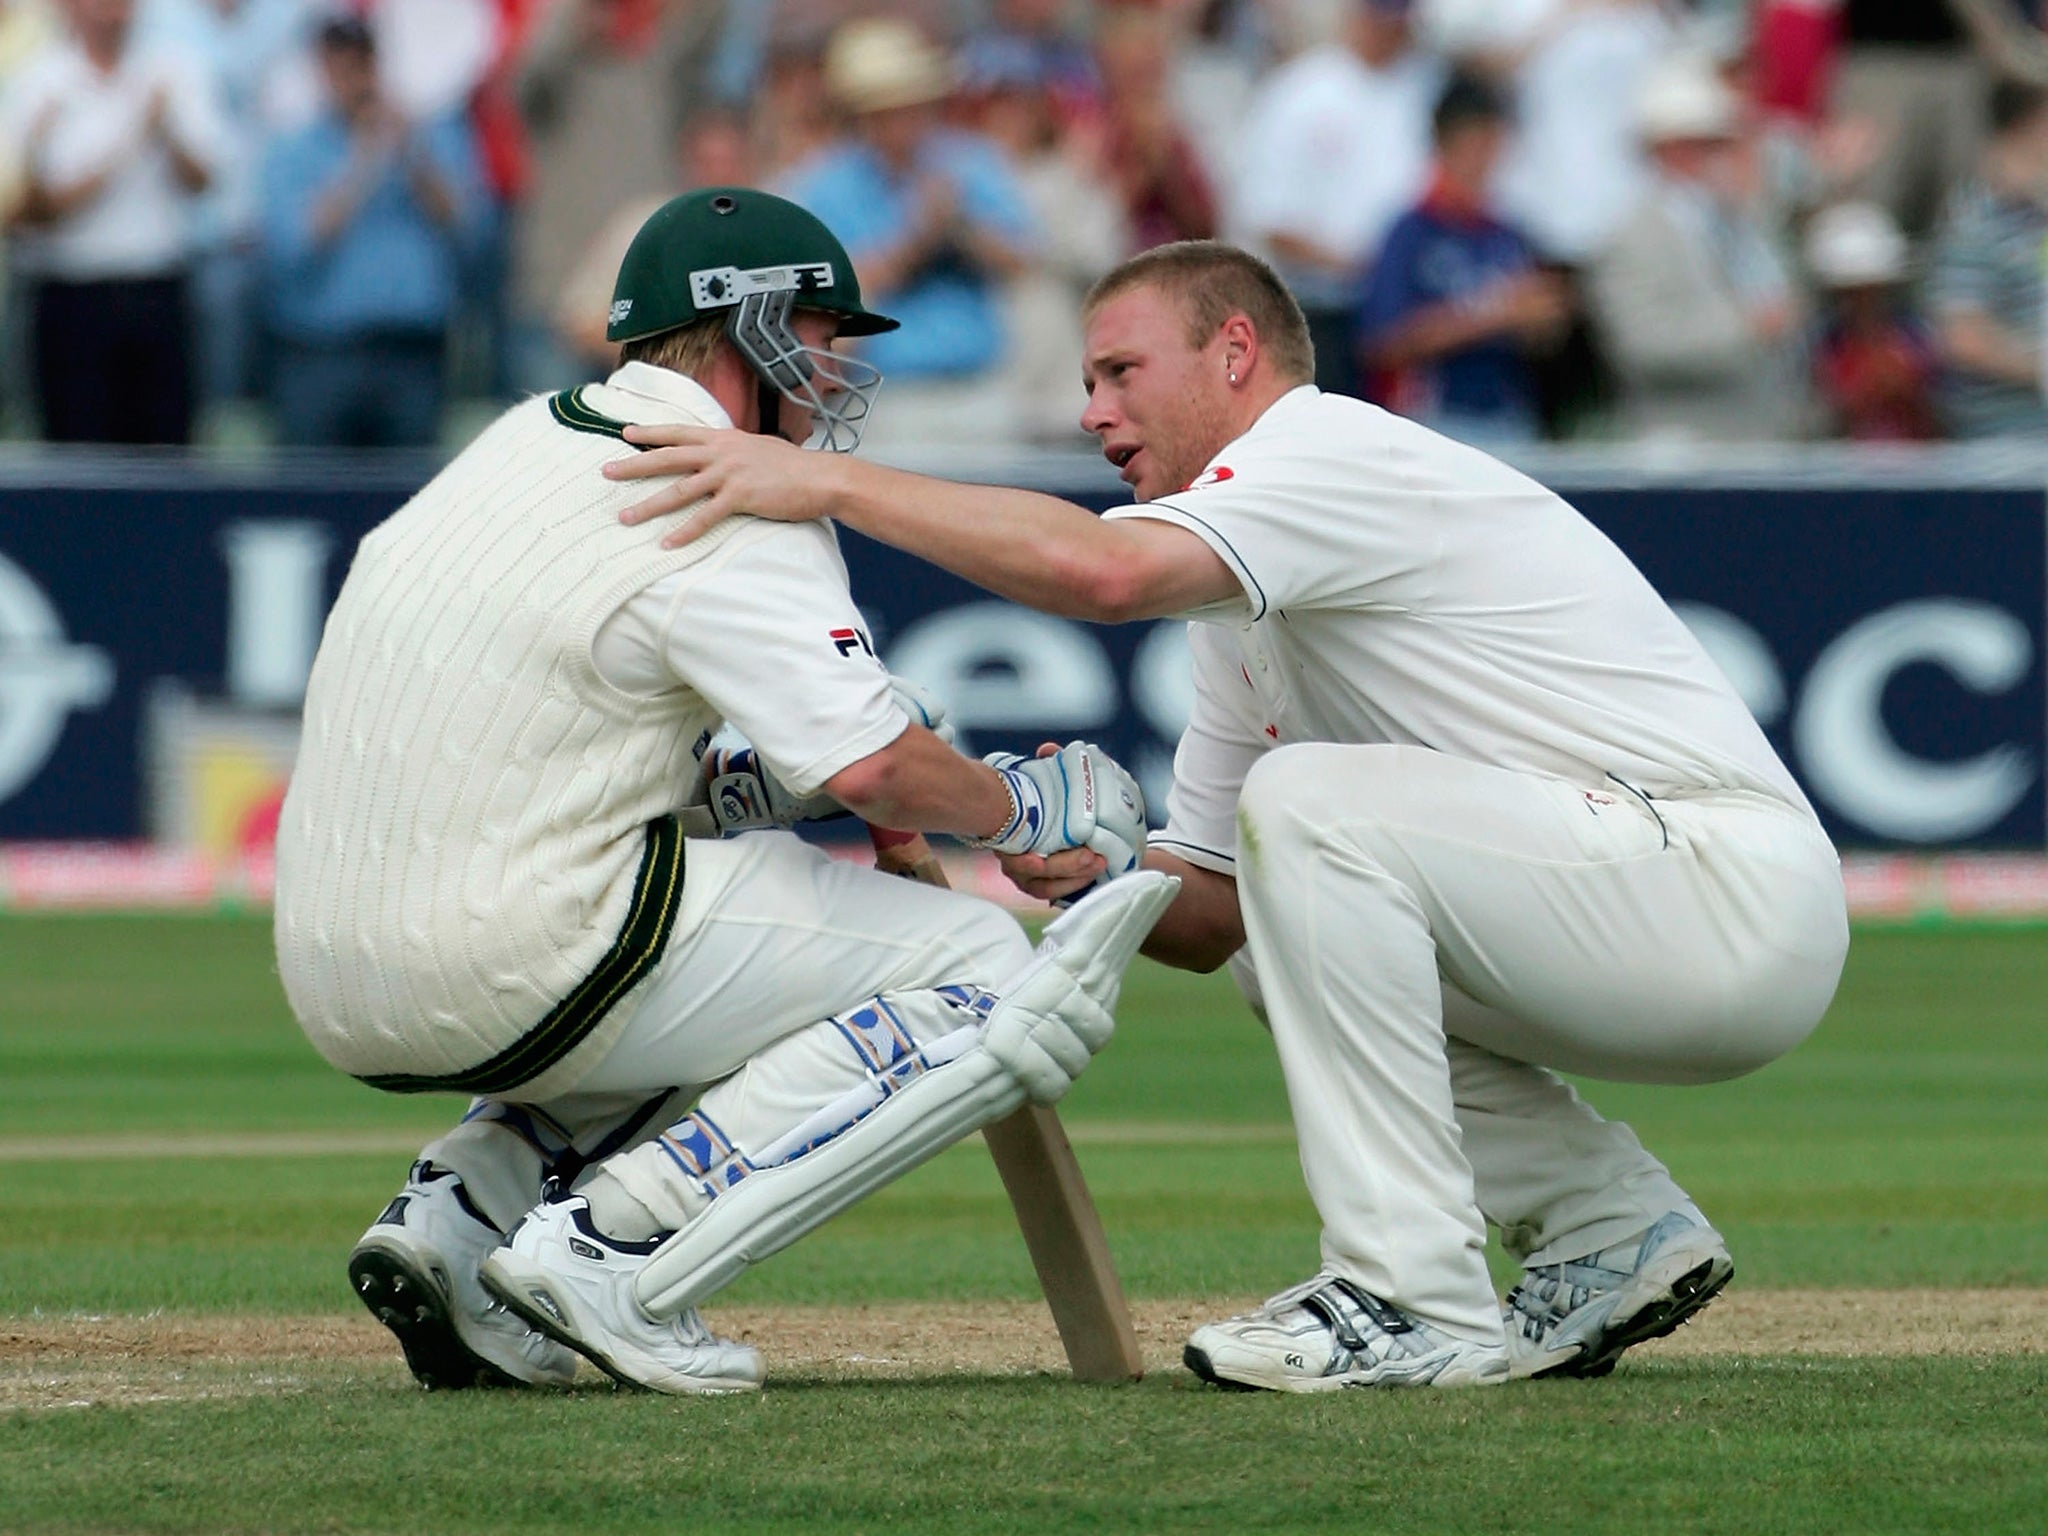 Andrew Flintoff consoles Brett Lee after the 2005 Edgbaston Ashes Test